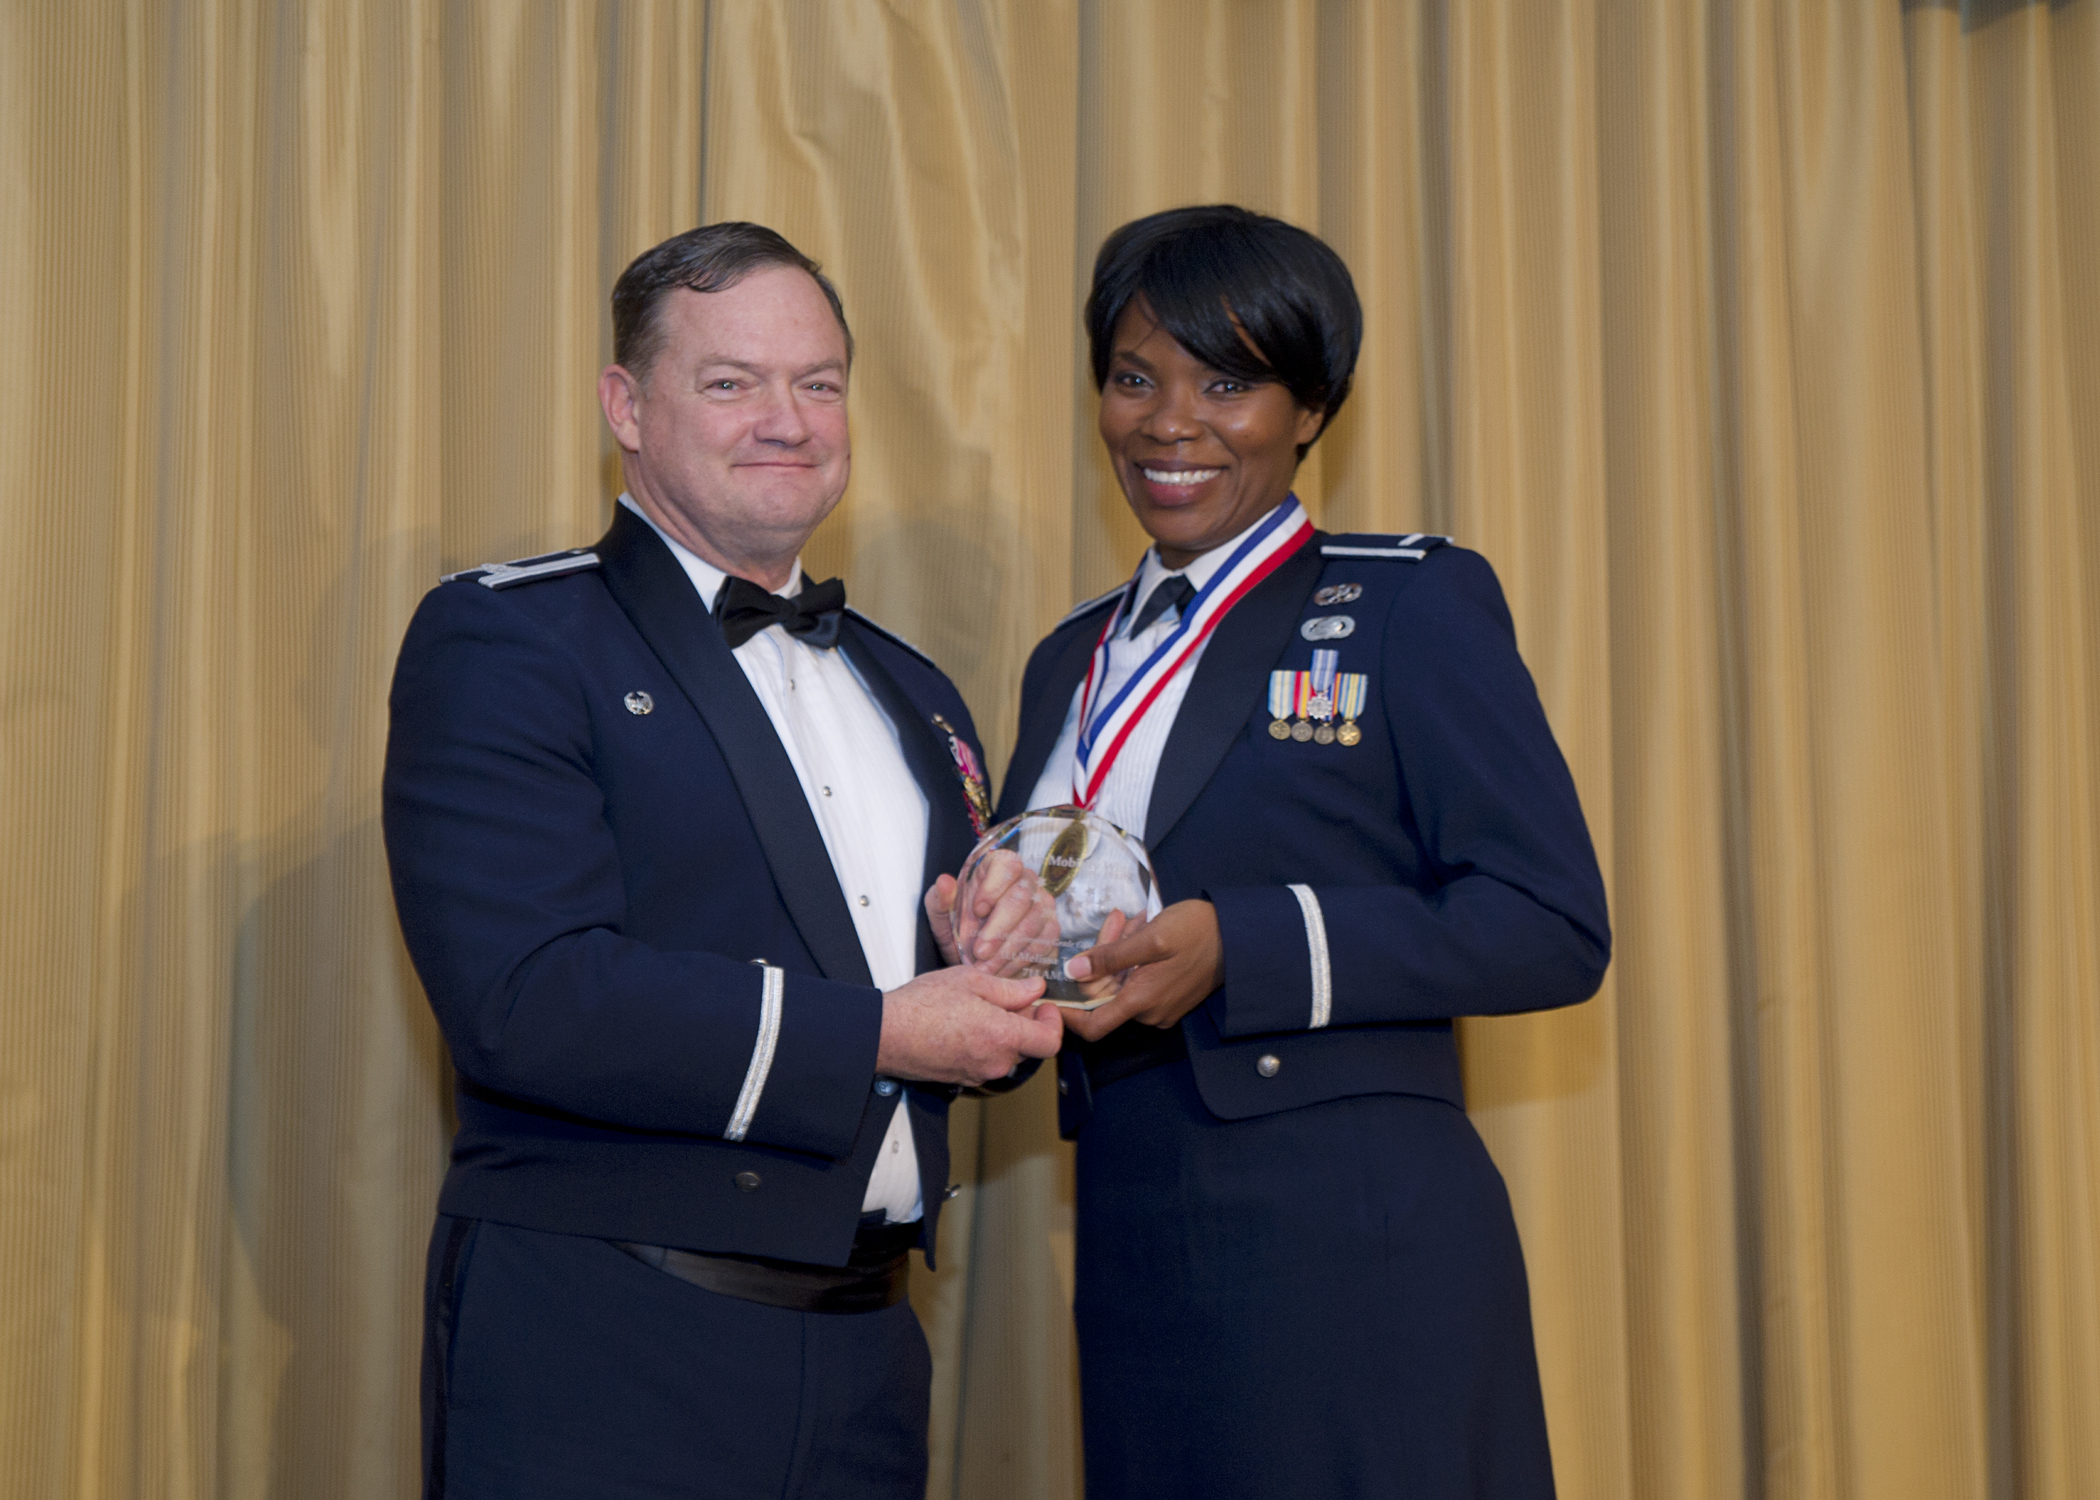 514th Air Mobility Wing Awards Banquet